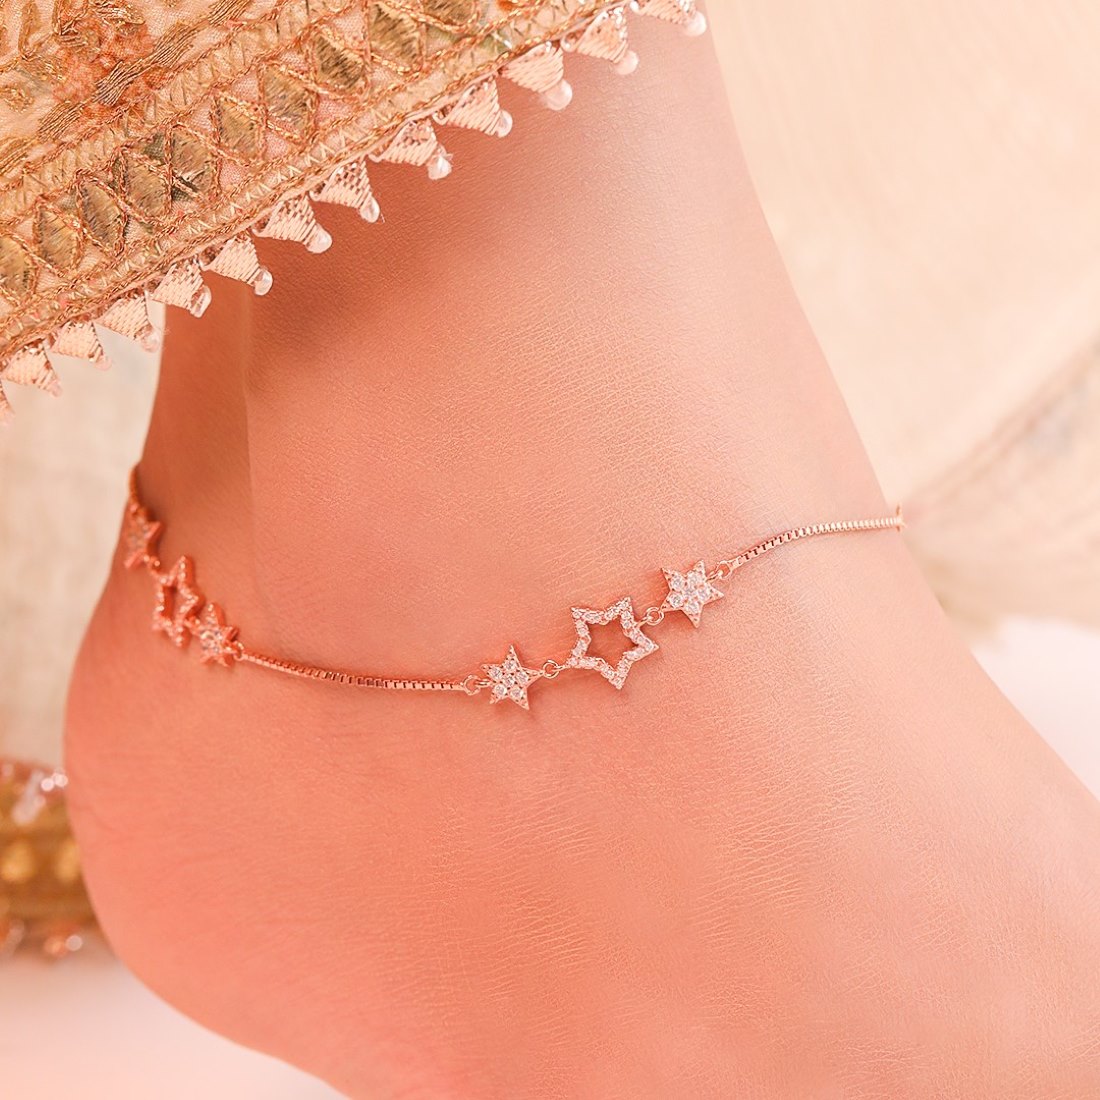 Star Cubic Zirconia Rose Gold Plated 925 Sterling Silver Anklet